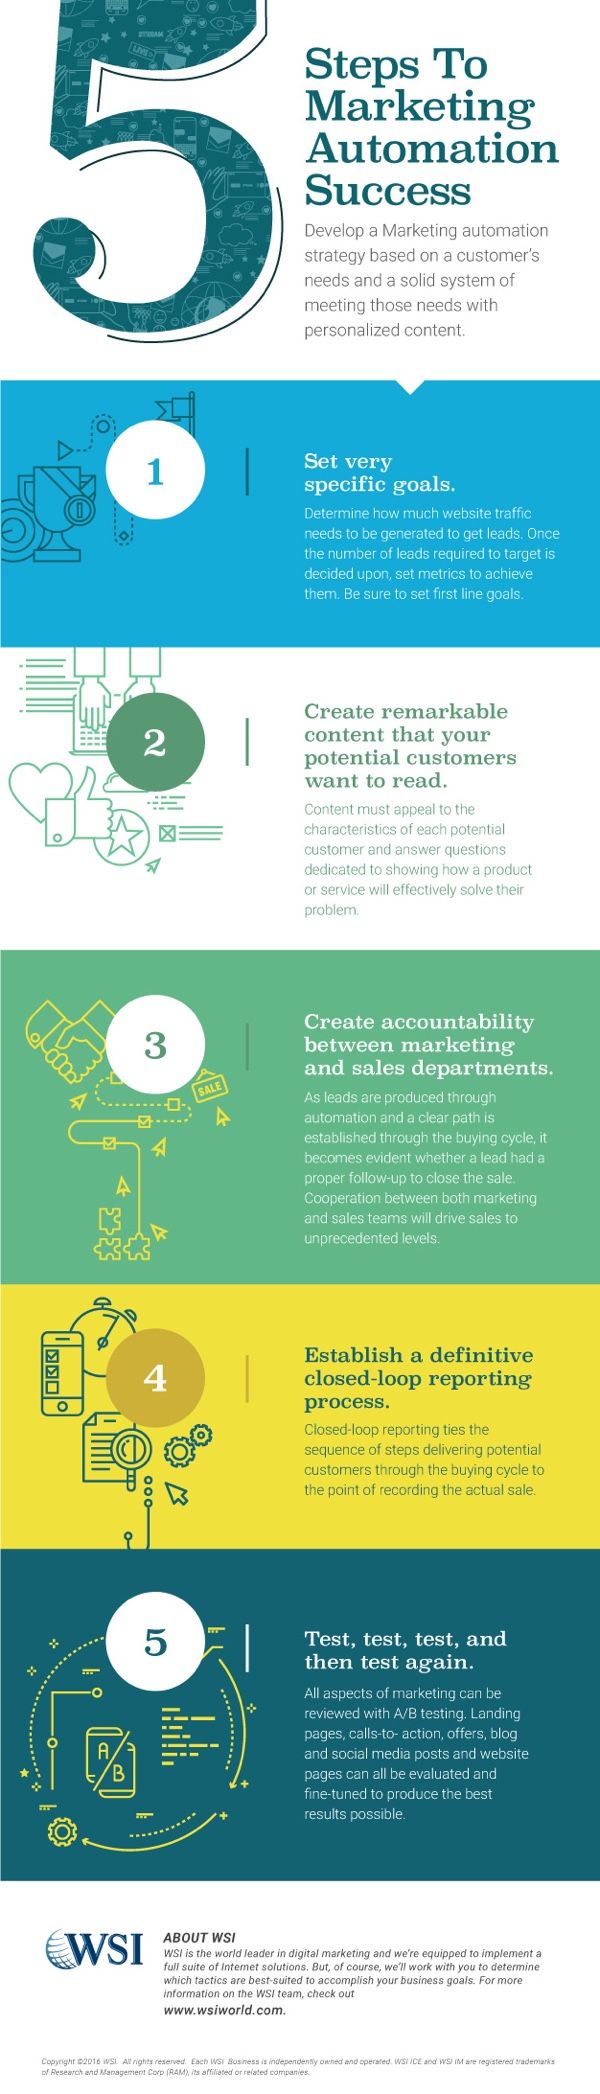 Infographic for 5 steps to marketing automation success | Benefits of Marketing Automation | VIEWS Digital Marketing